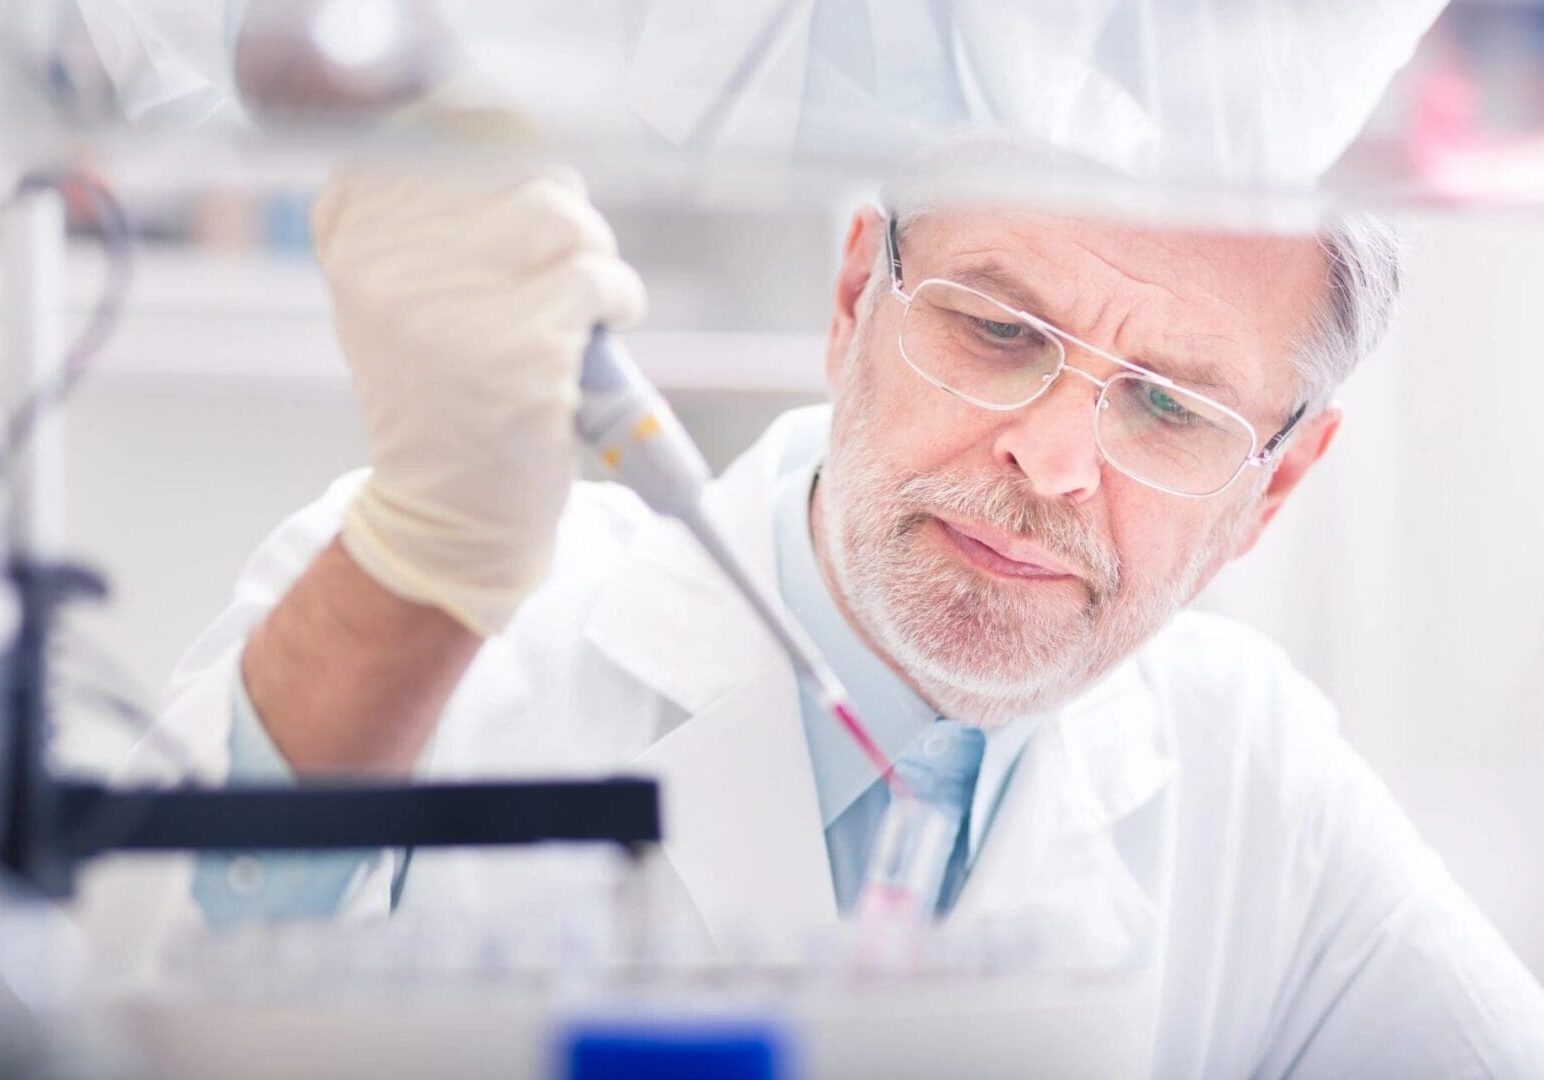 Senior male scientist in lab coat and safety glasses using a pipette in a laboratory setting.